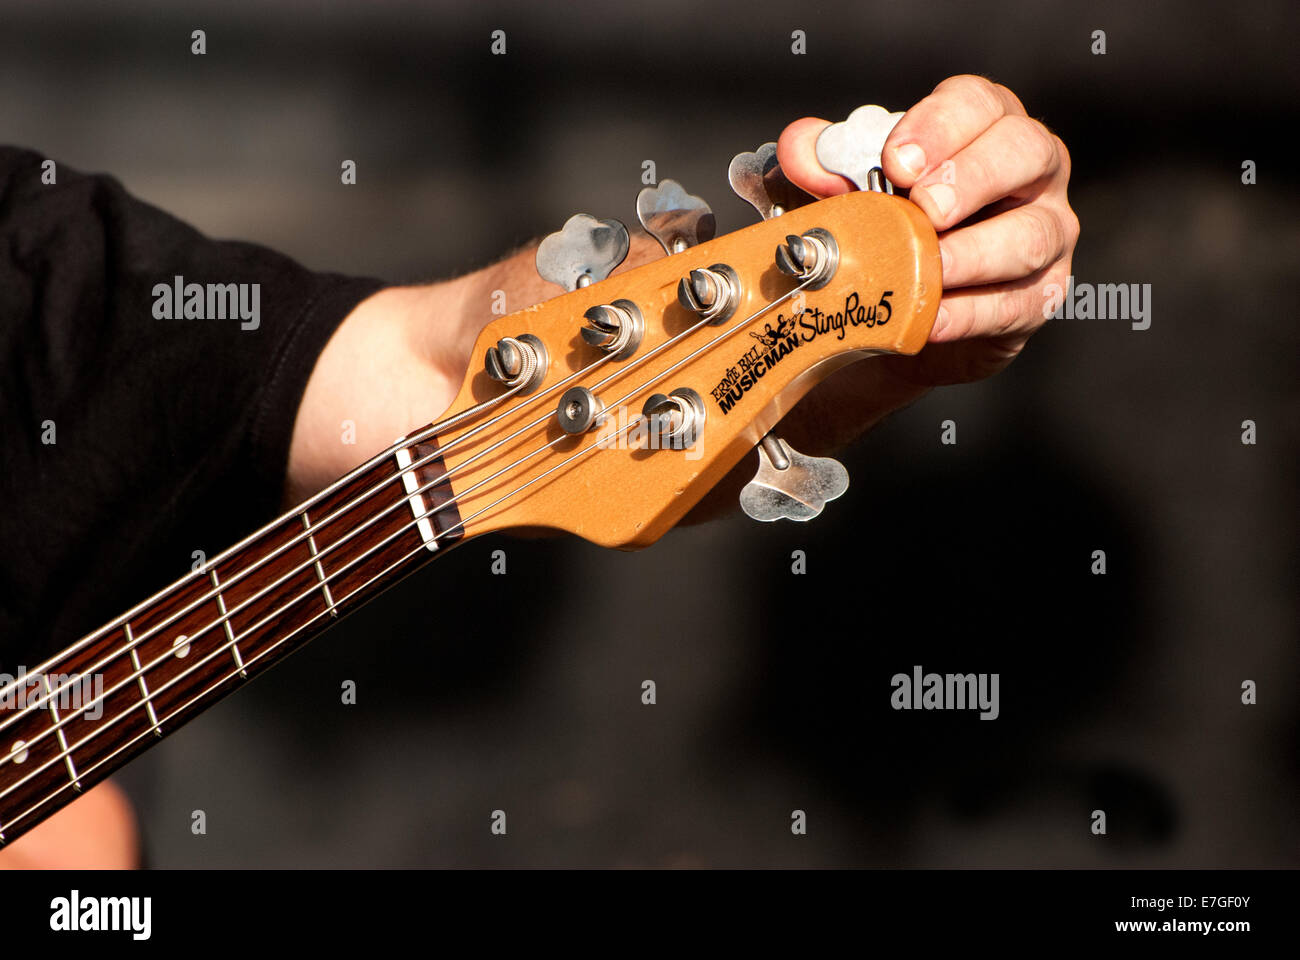 Tuning a guitar Stock Photo